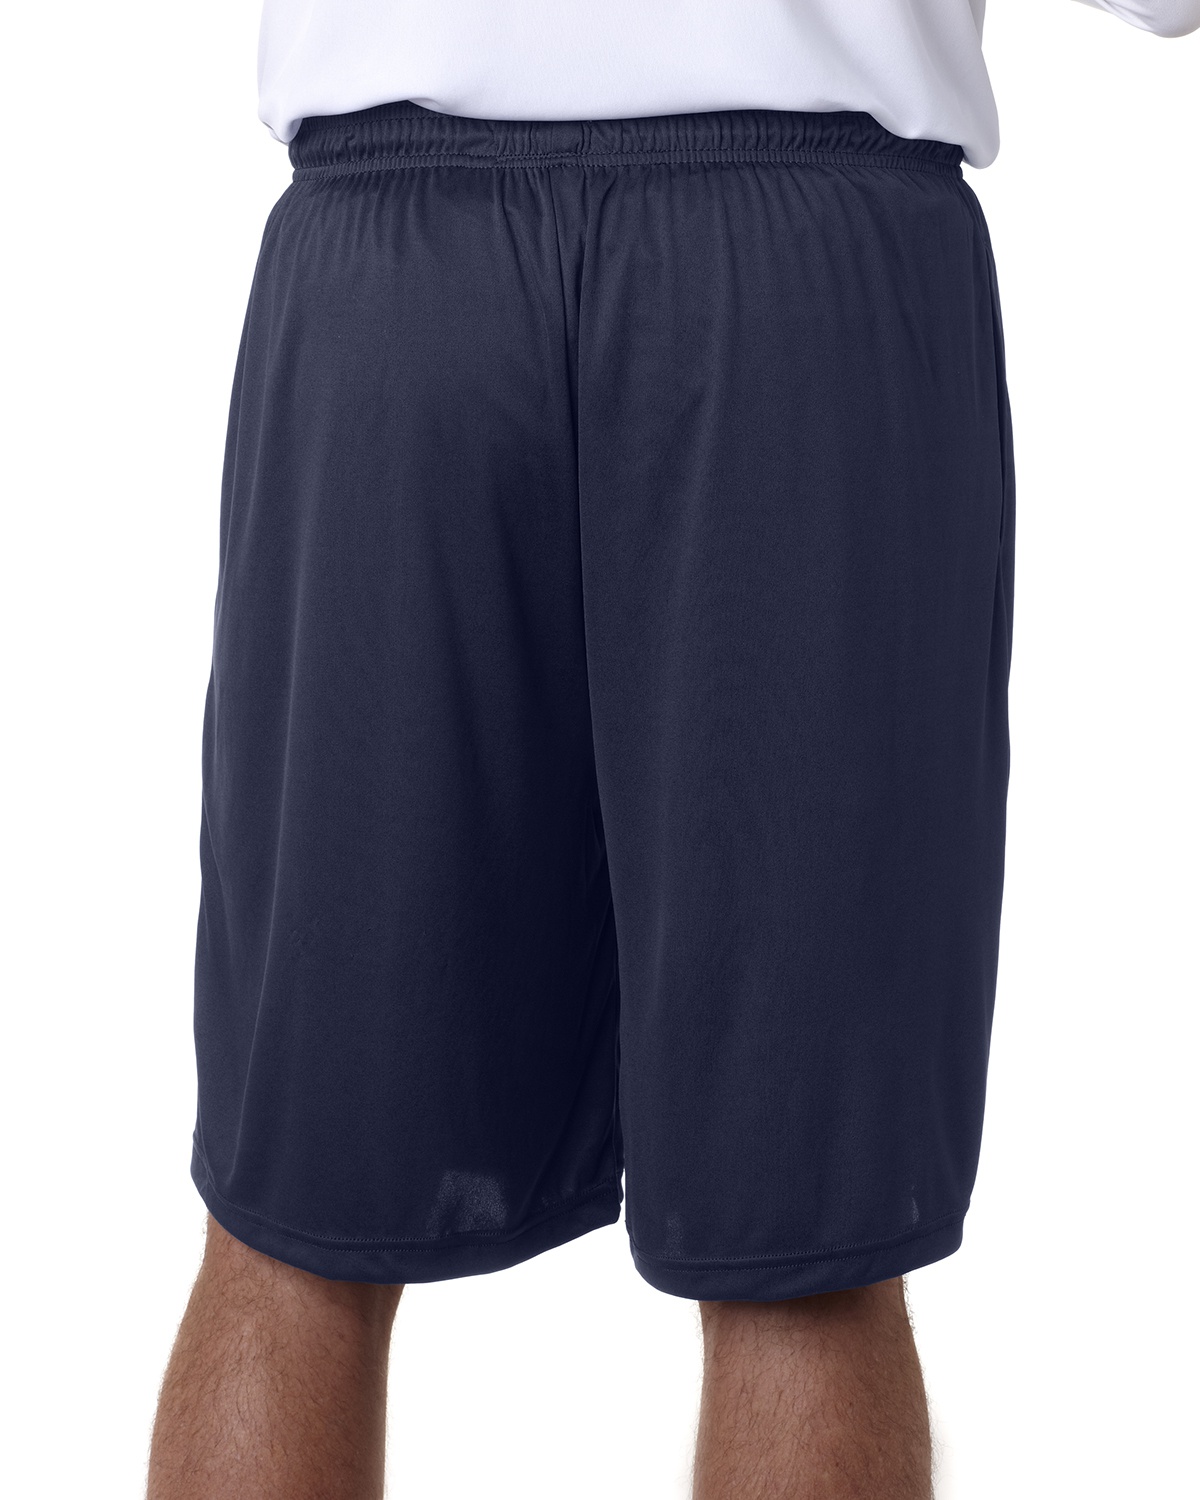 Badger Men's B-Core 10 Performance Shorts with Pockets 4119 S-3XL 